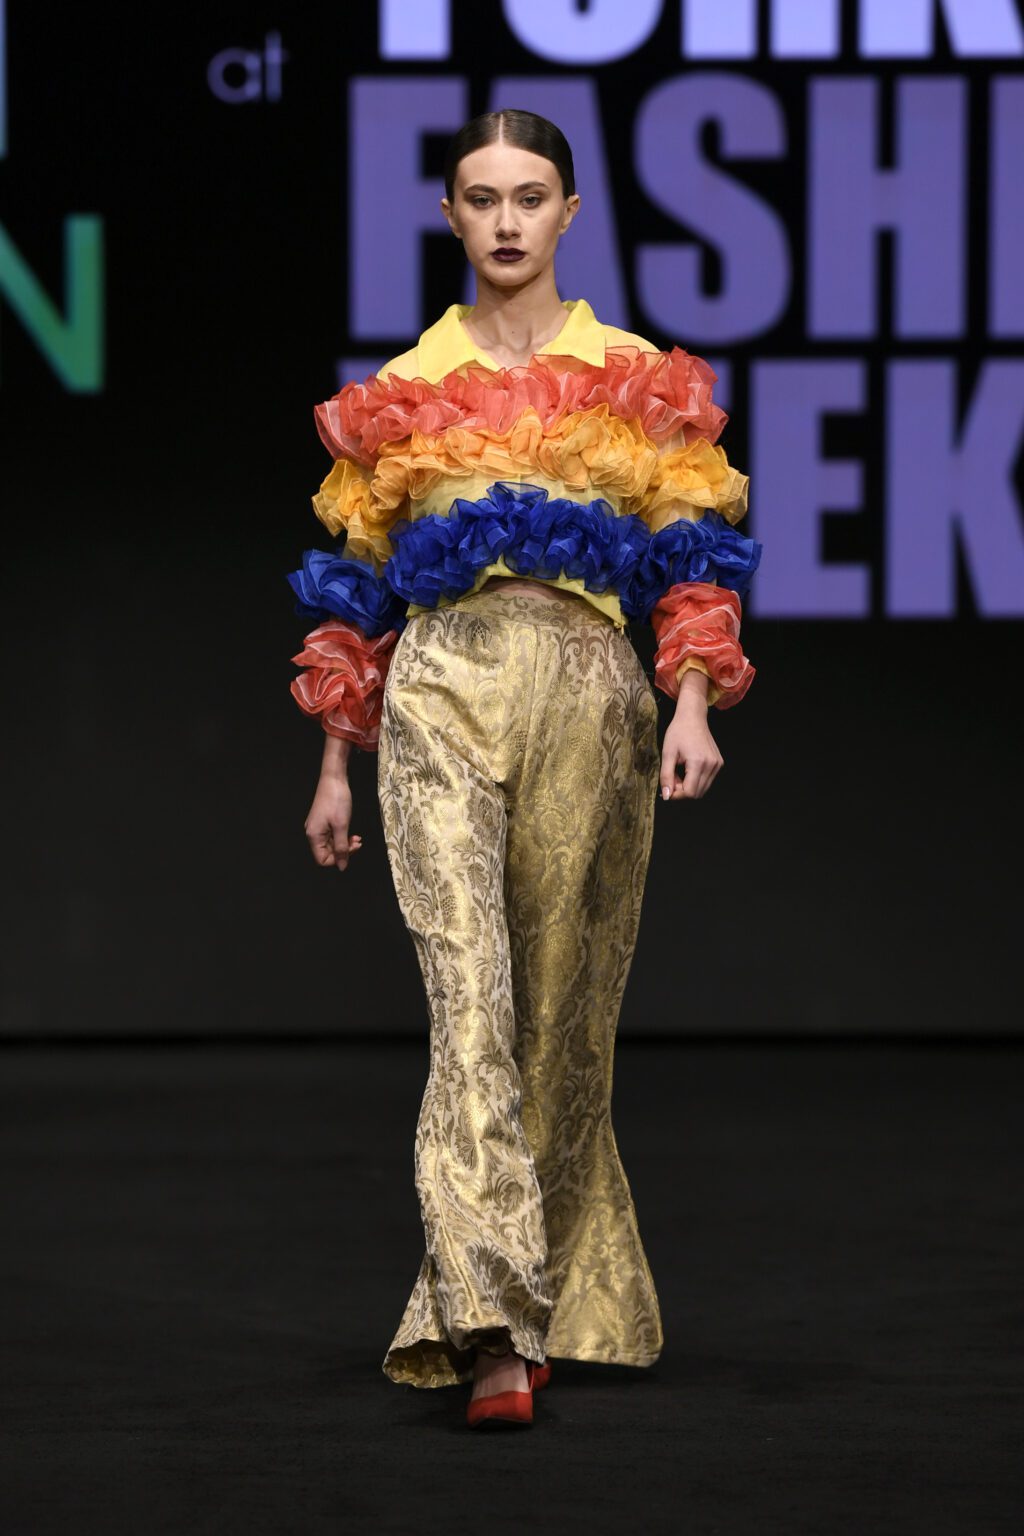 NEW YORK, NEW YORK - FEBRUARY 12: Sadi Karawalks the runway wearing INIFD-LST India Fashion Trunk - At New York Fashion Week Powered By Art Hearts Fashion at The Ziegfeld Ballroom on February 12, 2022 in New York City. (Photo by Arun Nevader/Getty Images for Art Hearts Fashion)